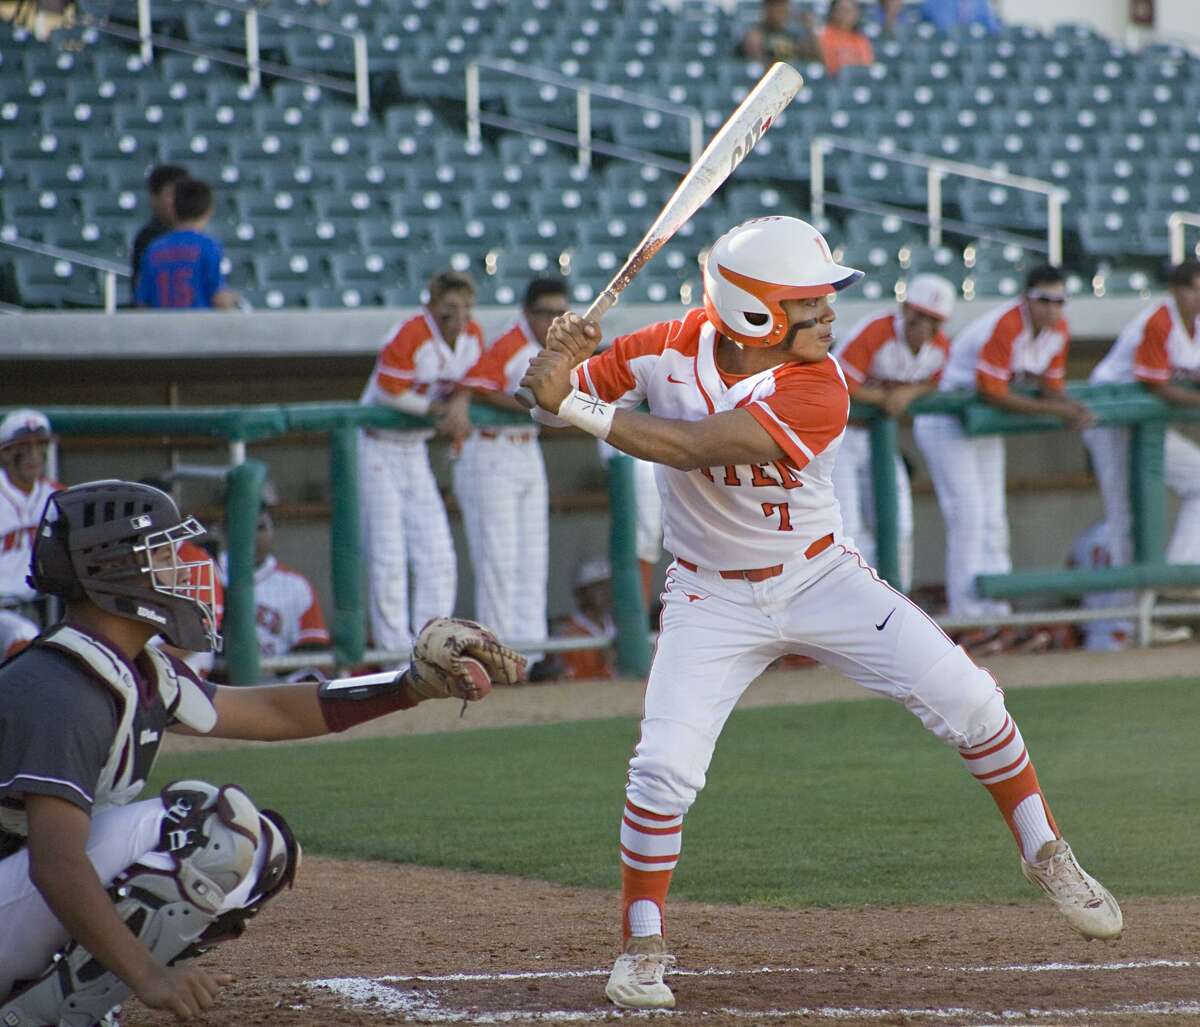 Fernando Benavides had a double, a walk and three RBIs Saturday as United routed PSJA 15-1 in six innings in Roma to win a third straight area title.